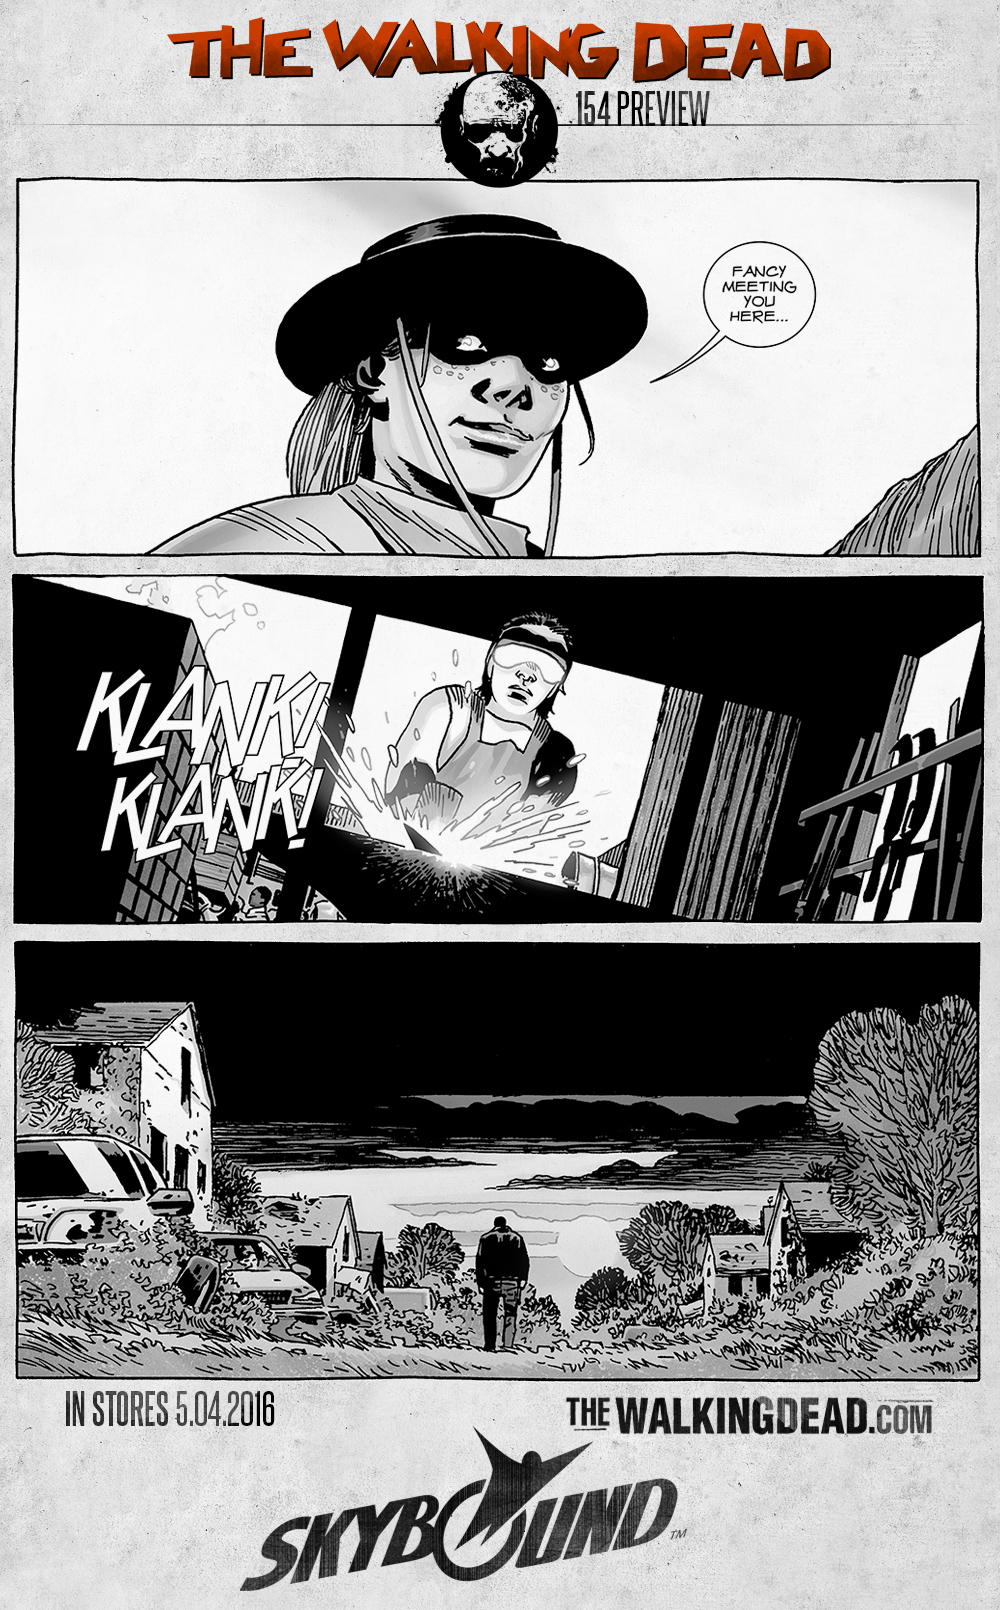 The-Walking-Dead-154-Preview